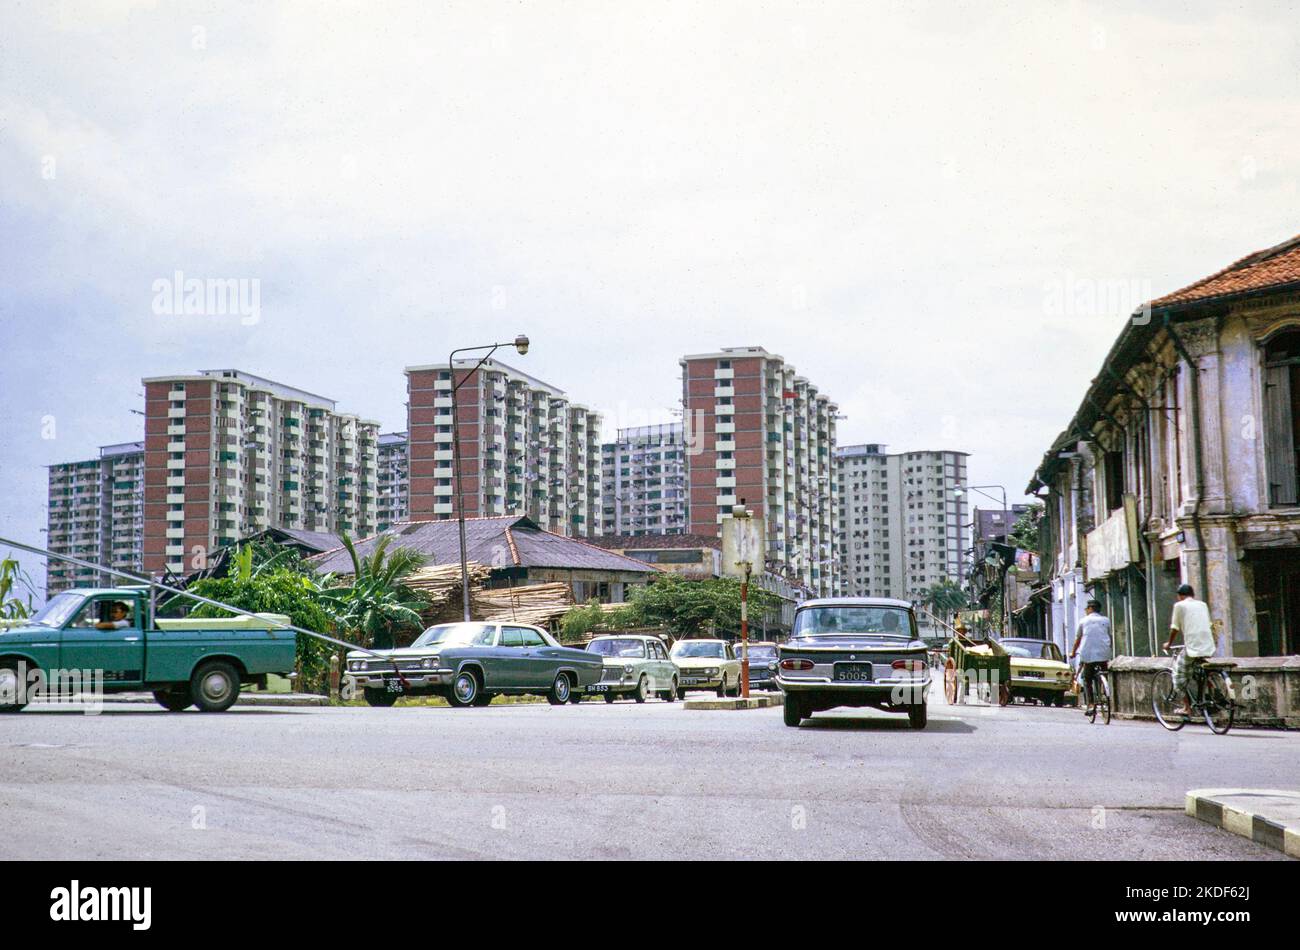 High rise apartment public housing HDB flats, Housing and Development Board project, Singapore, Asia, 1971 Stock Photo